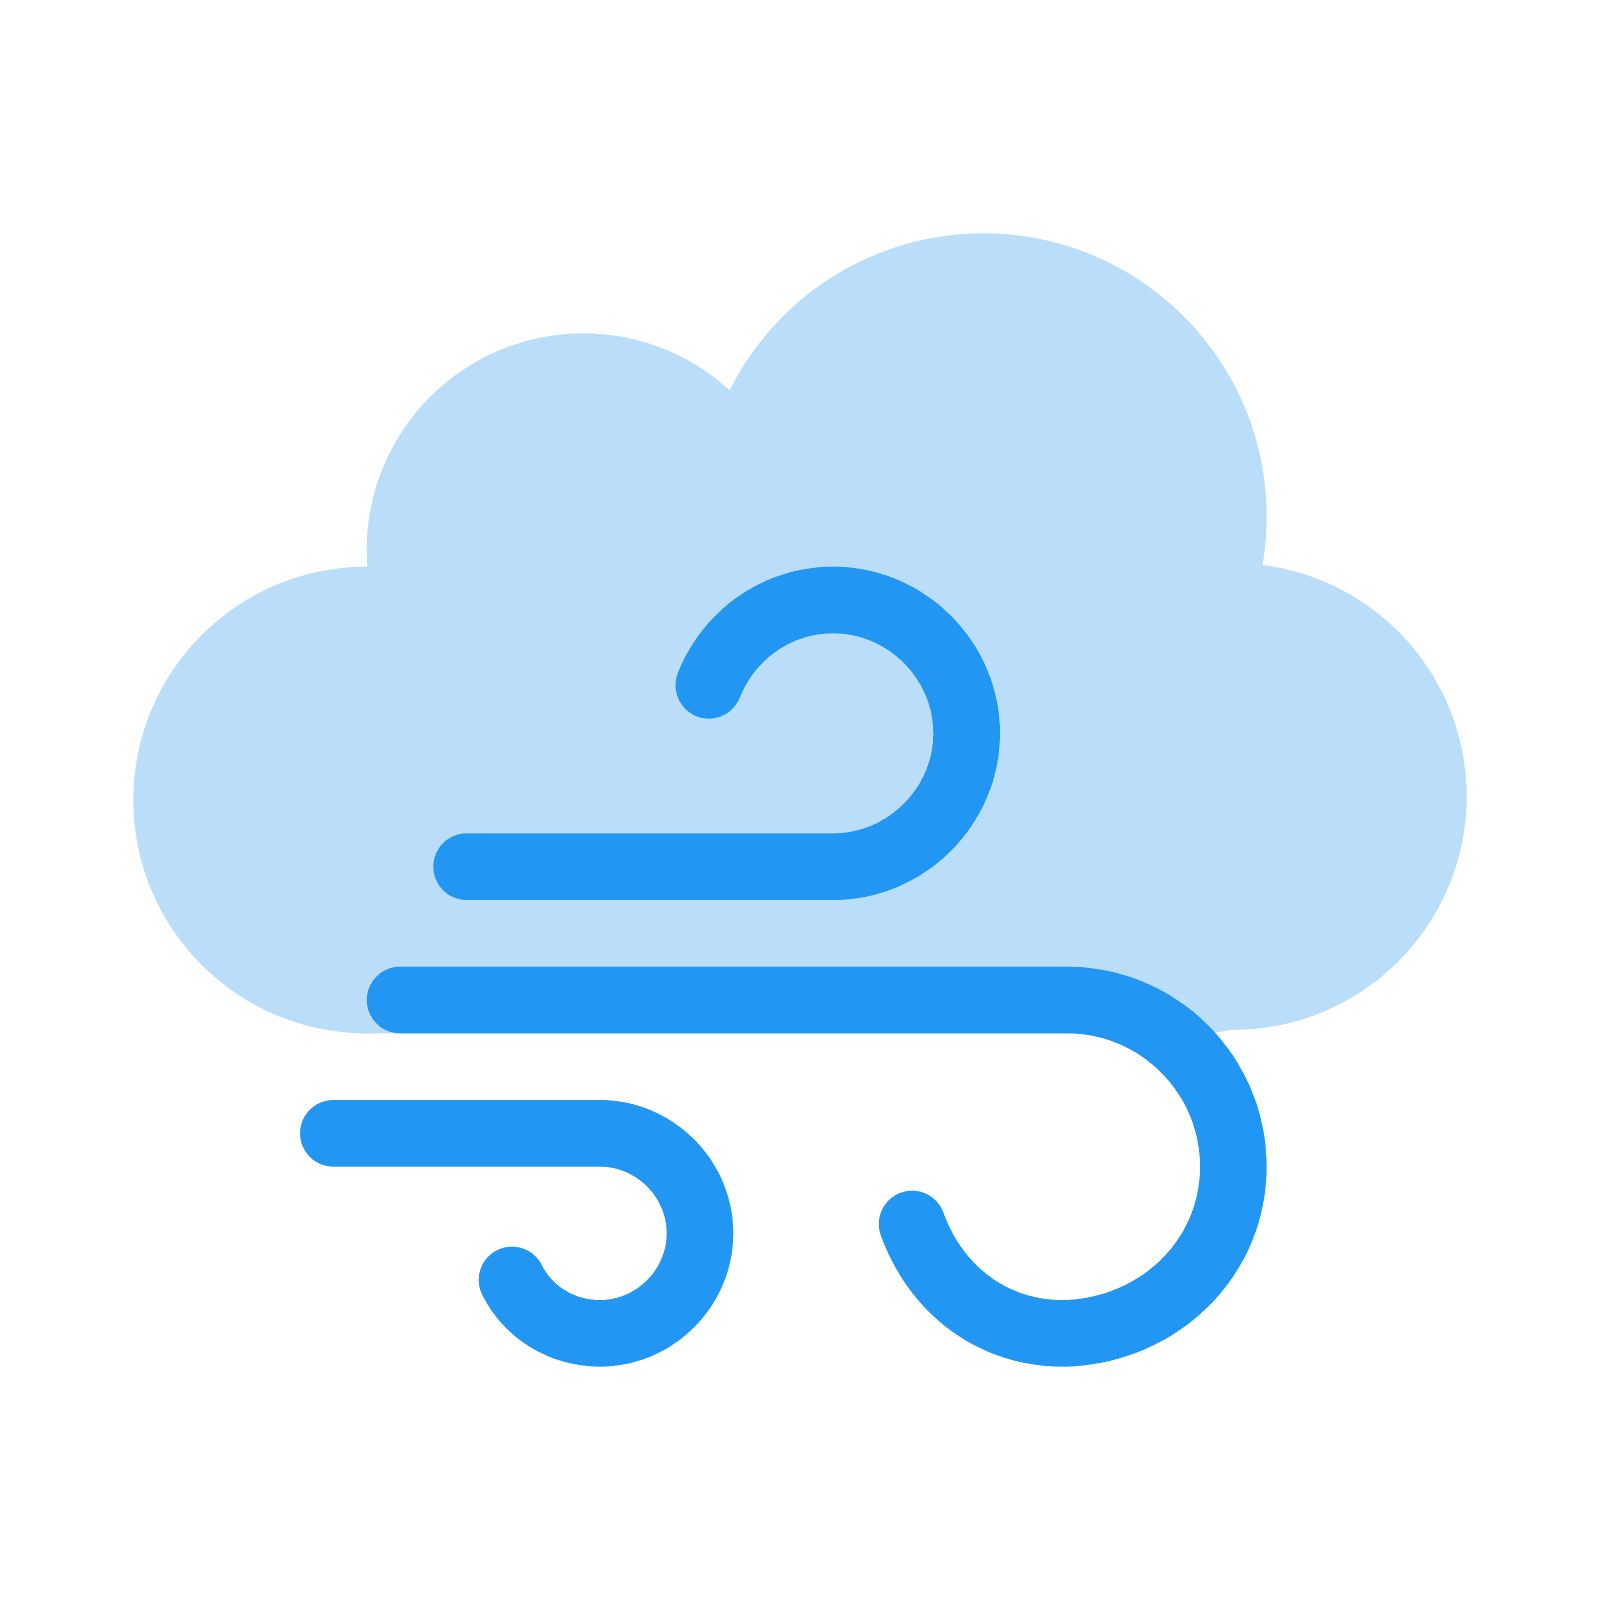 Weather at getdrawings com. Cloud clipart windy